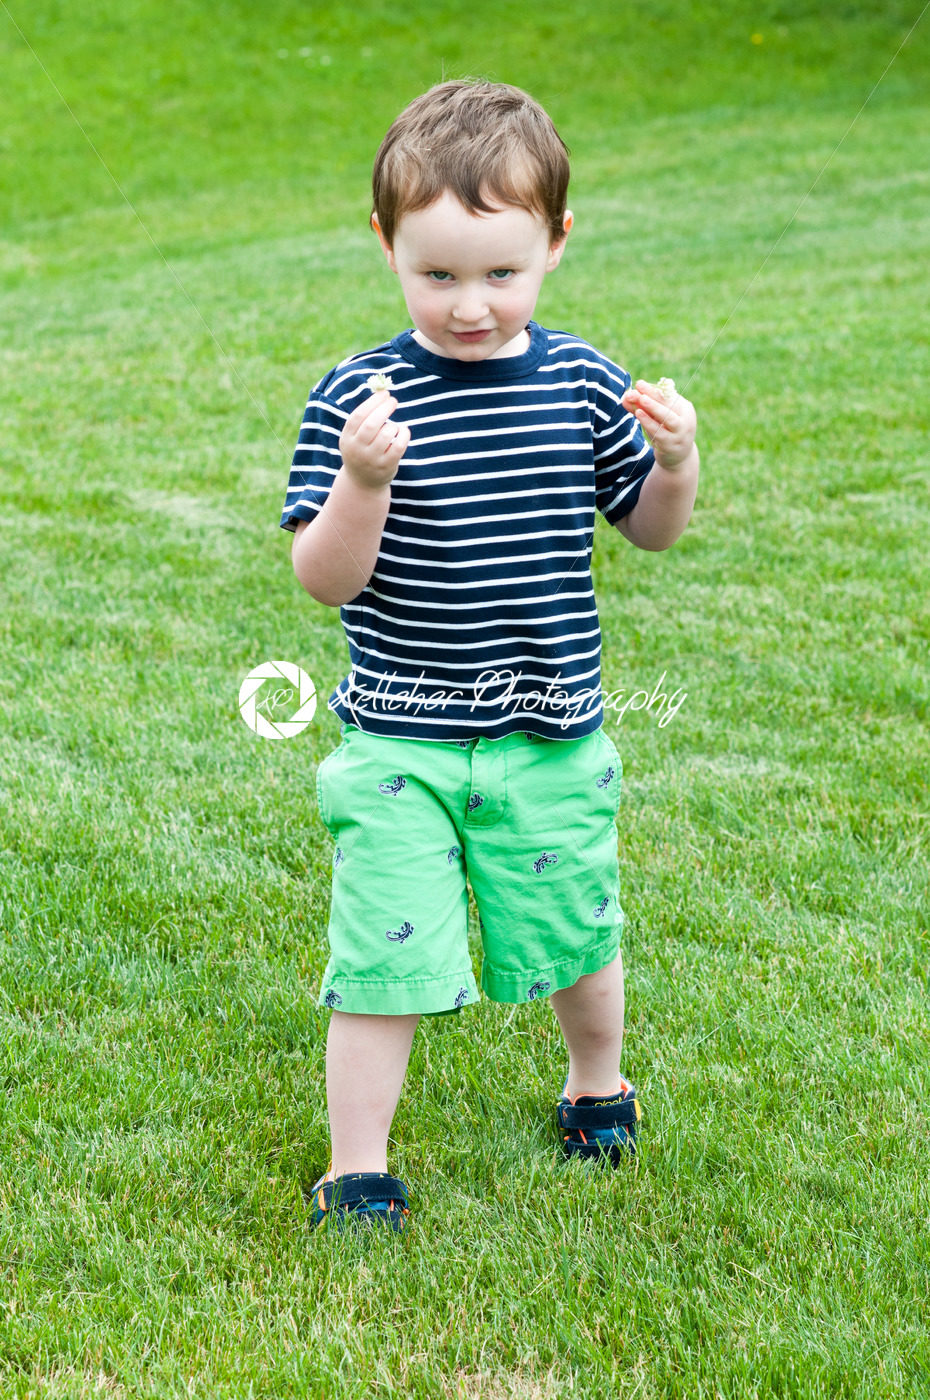 Portrait of a cute adorable little boy child running on grass - Kelleher Photography Store